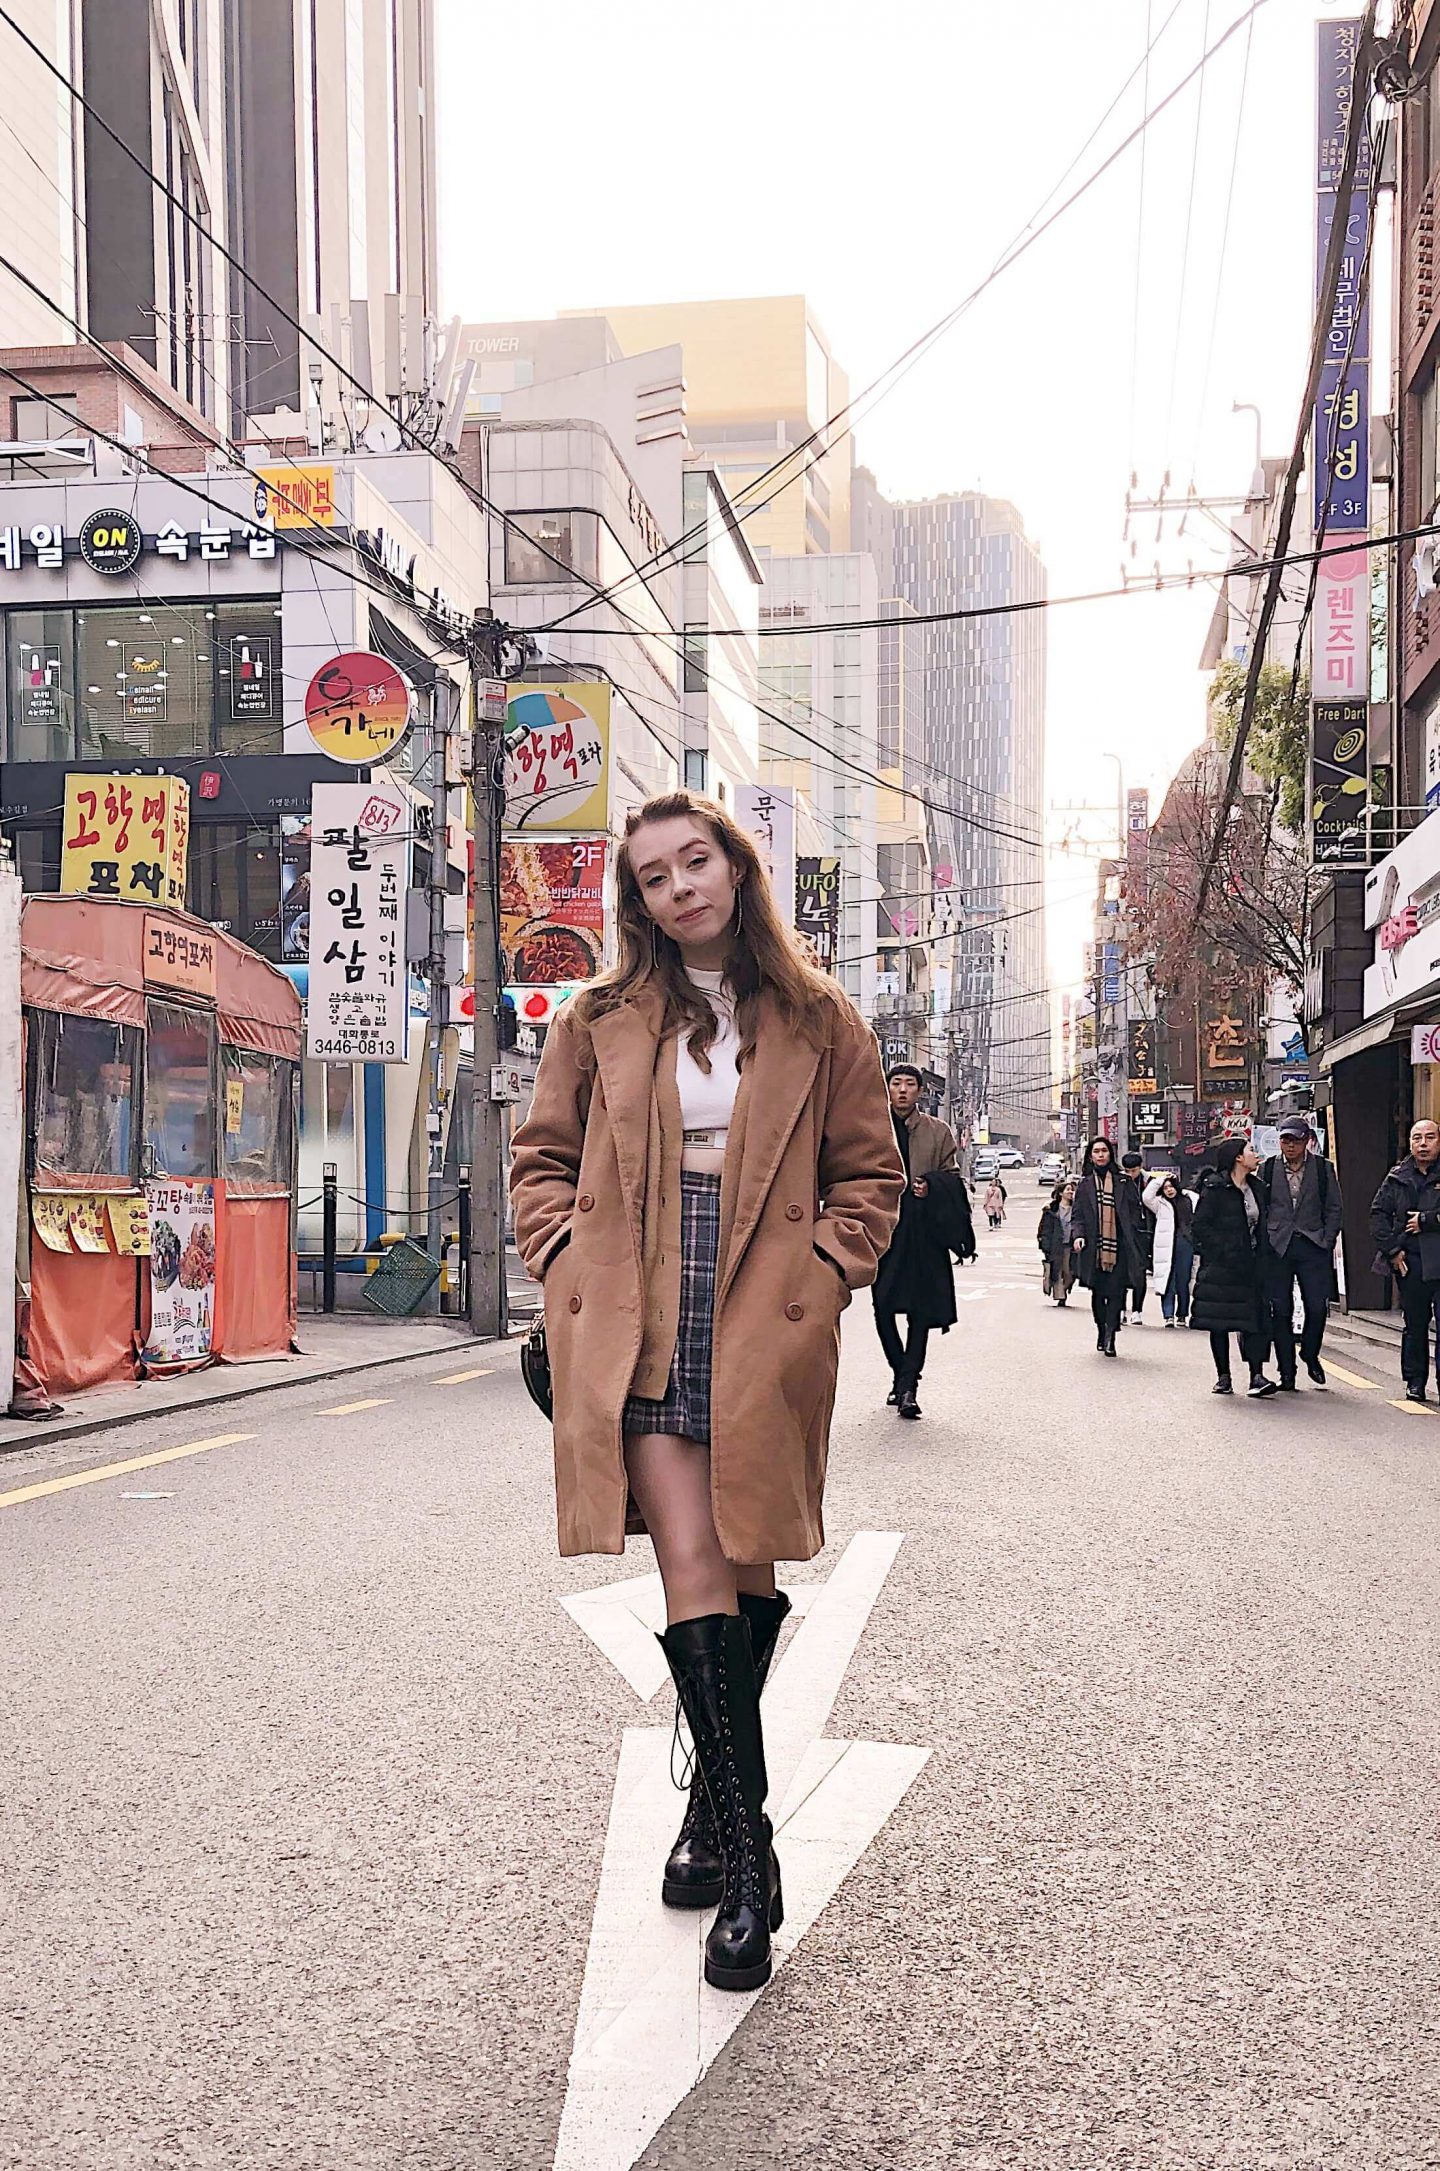 Fii is standing in the middle of the road facing the camera, with tall buildings either side and some people behind. She is wearing the same outfit as above and almost smiling at the camera. 